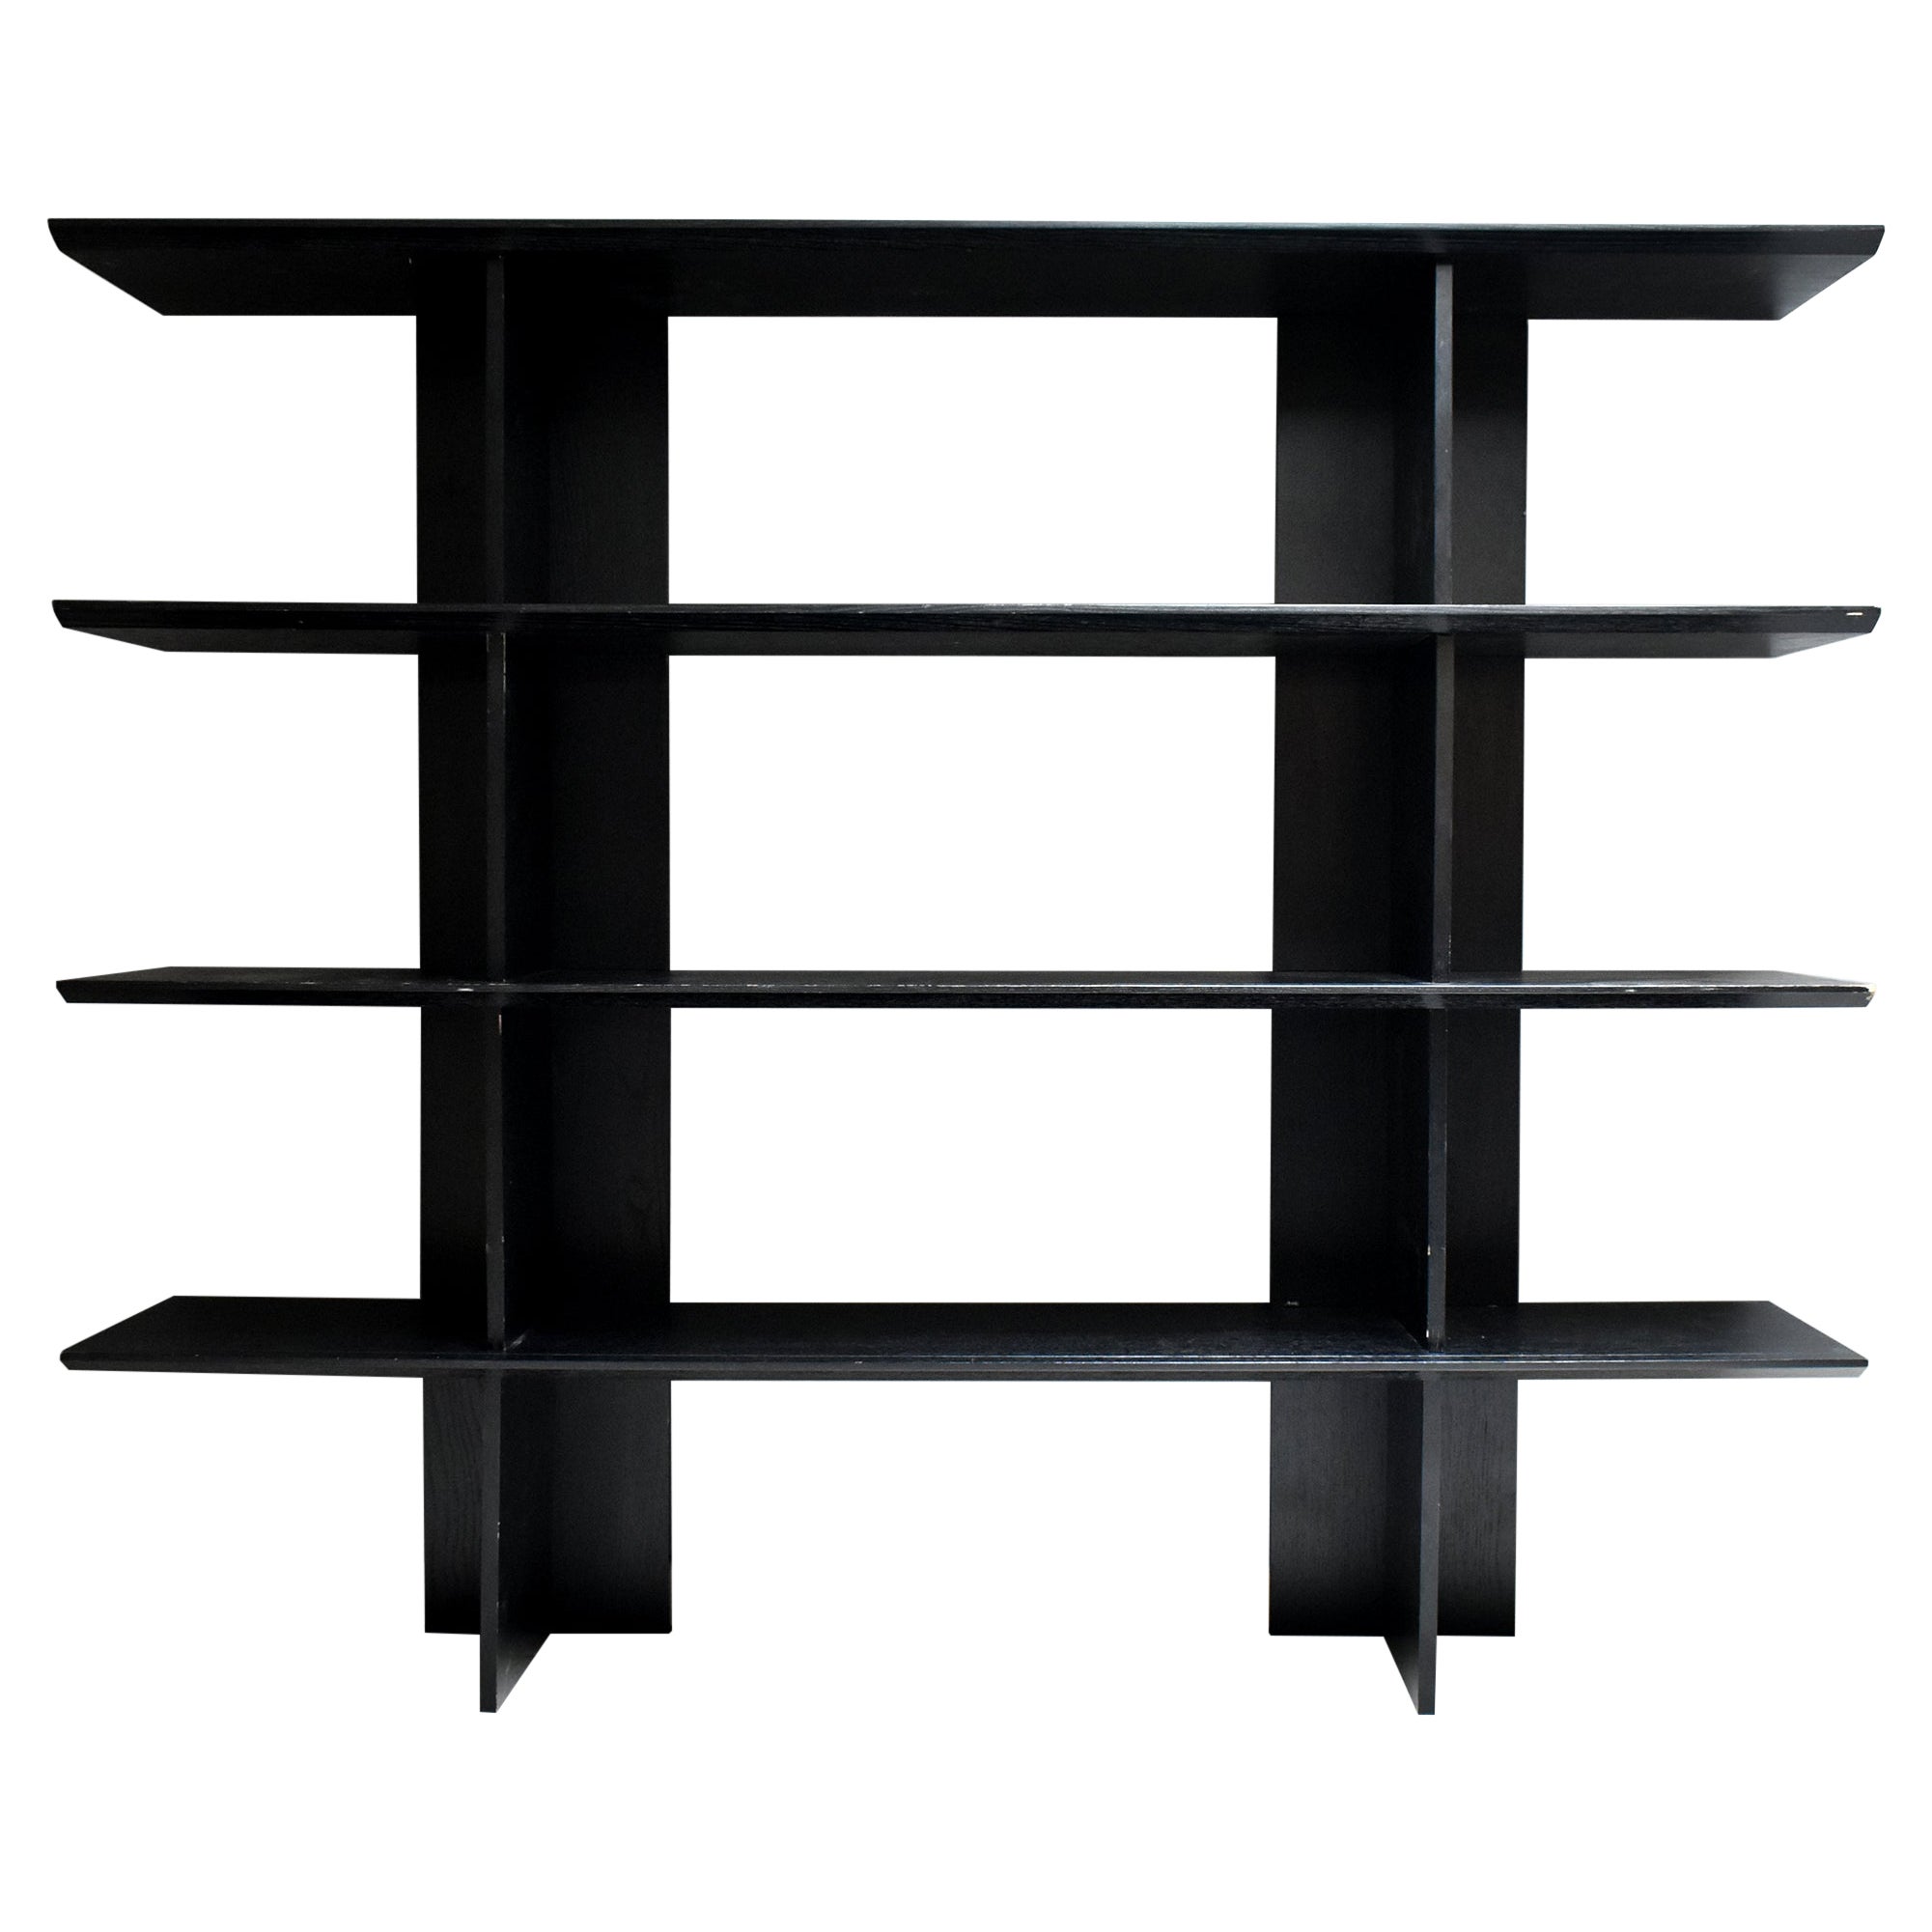 Vintage 80's Bookcase in Black Wood, Italian Manufacture